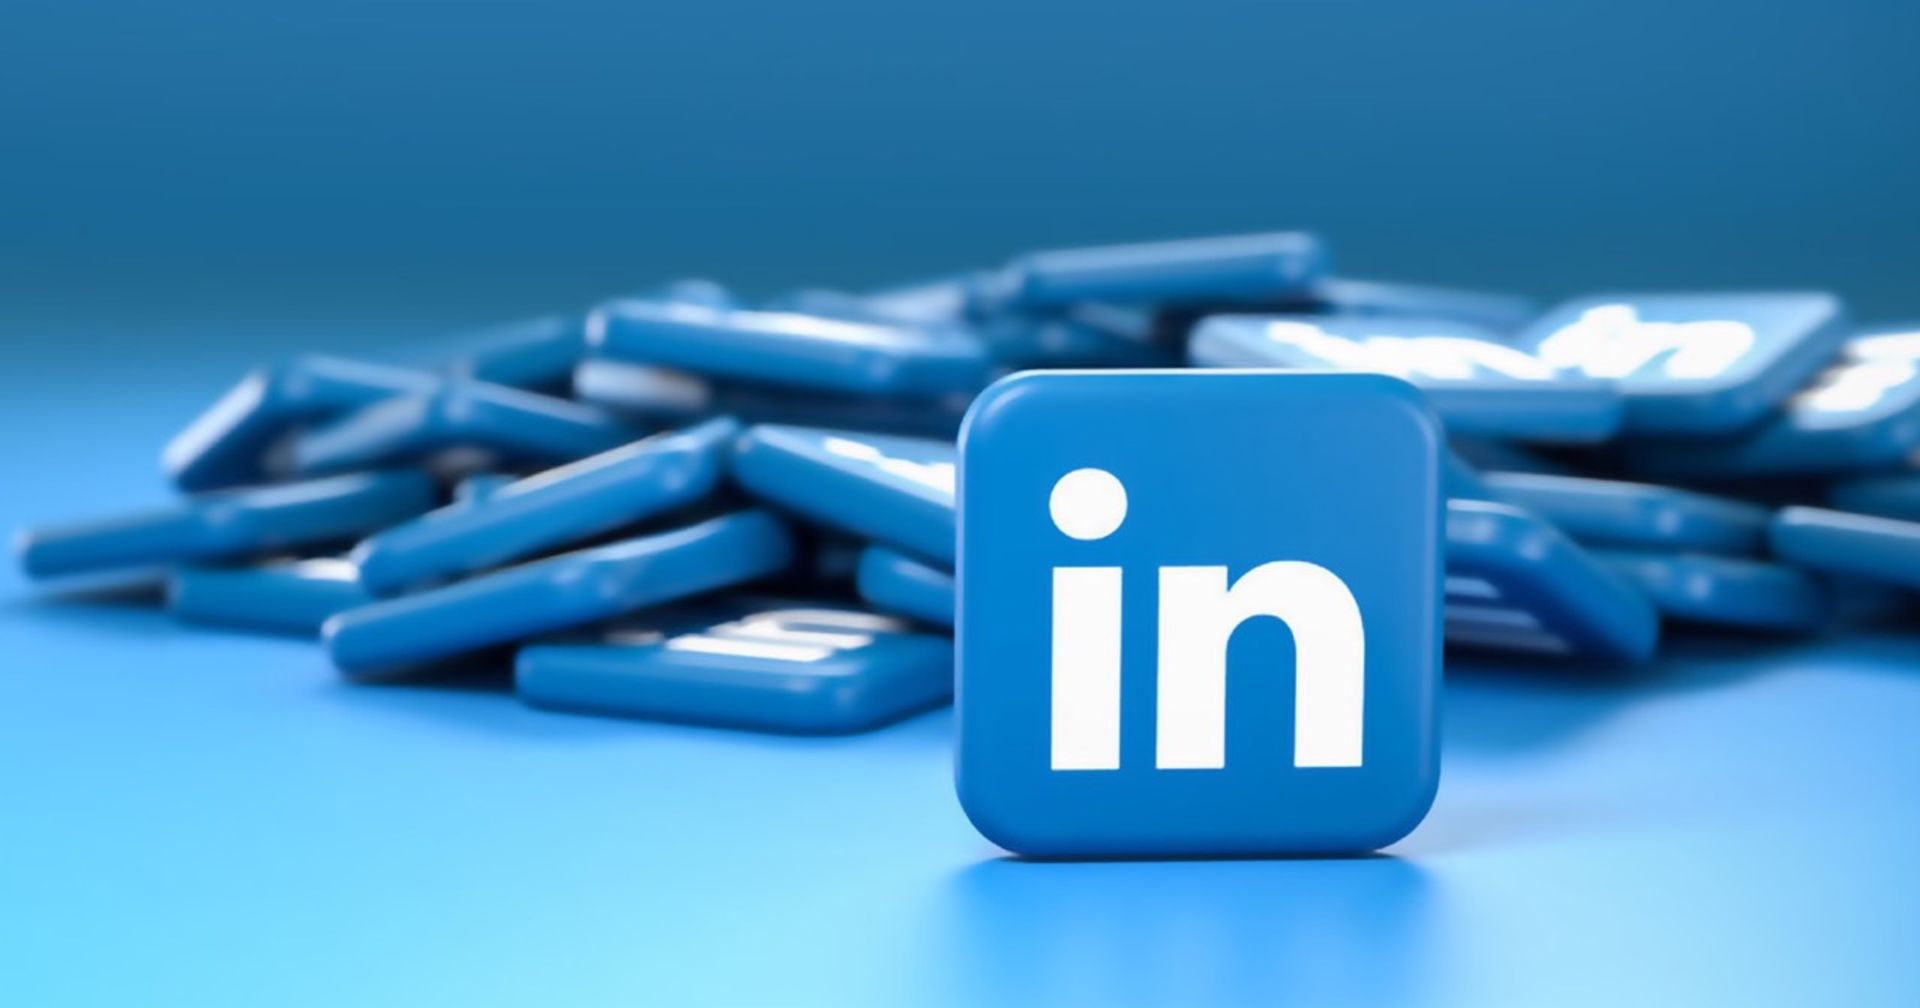 LinkedIn blue logo as a 3D tile, behind this are many other logo tiles in a pile.